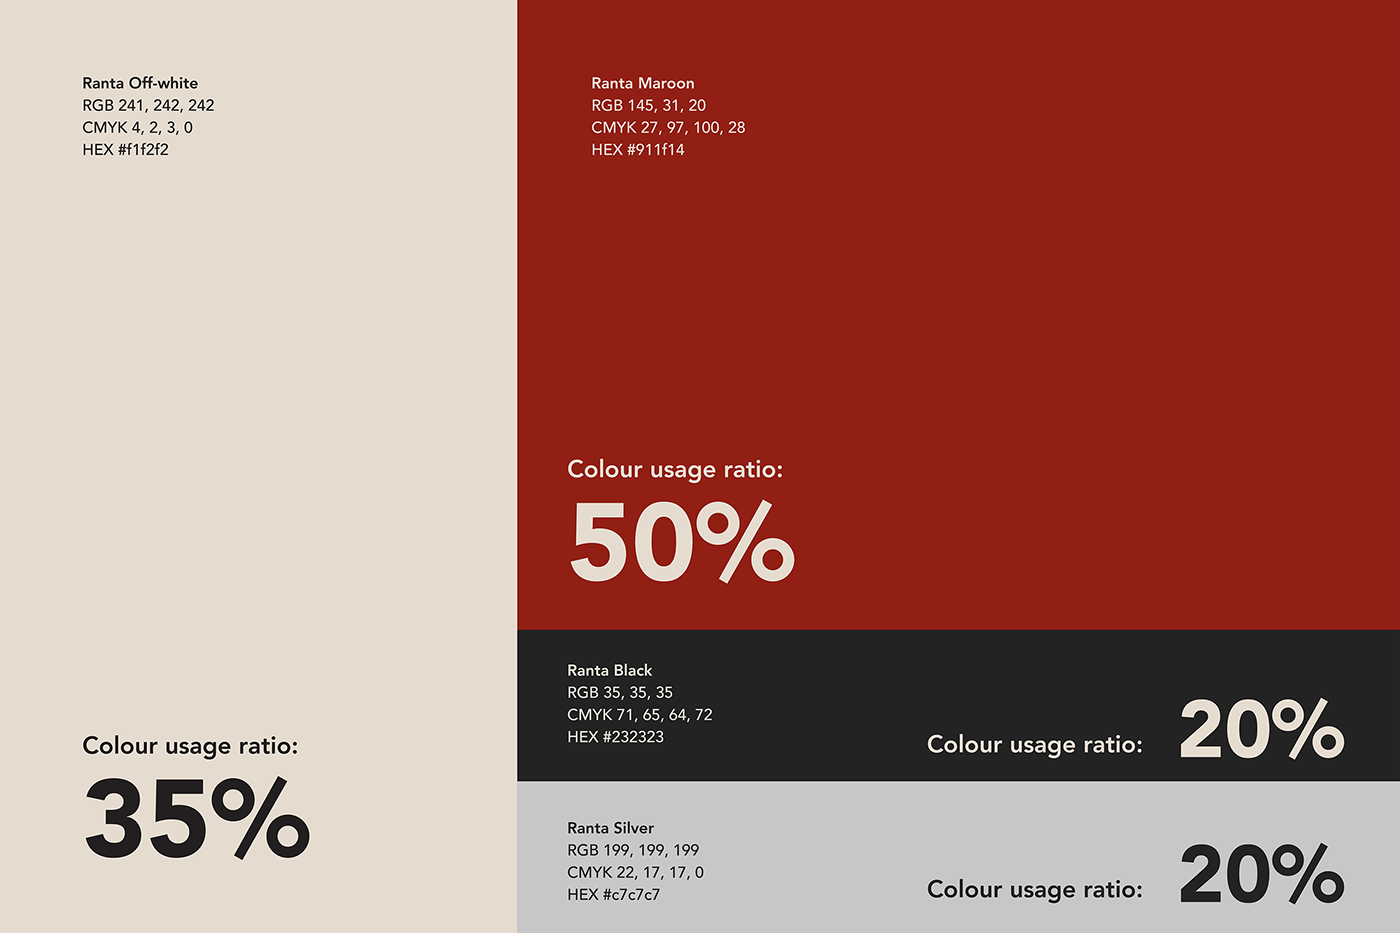 This is logo color usage